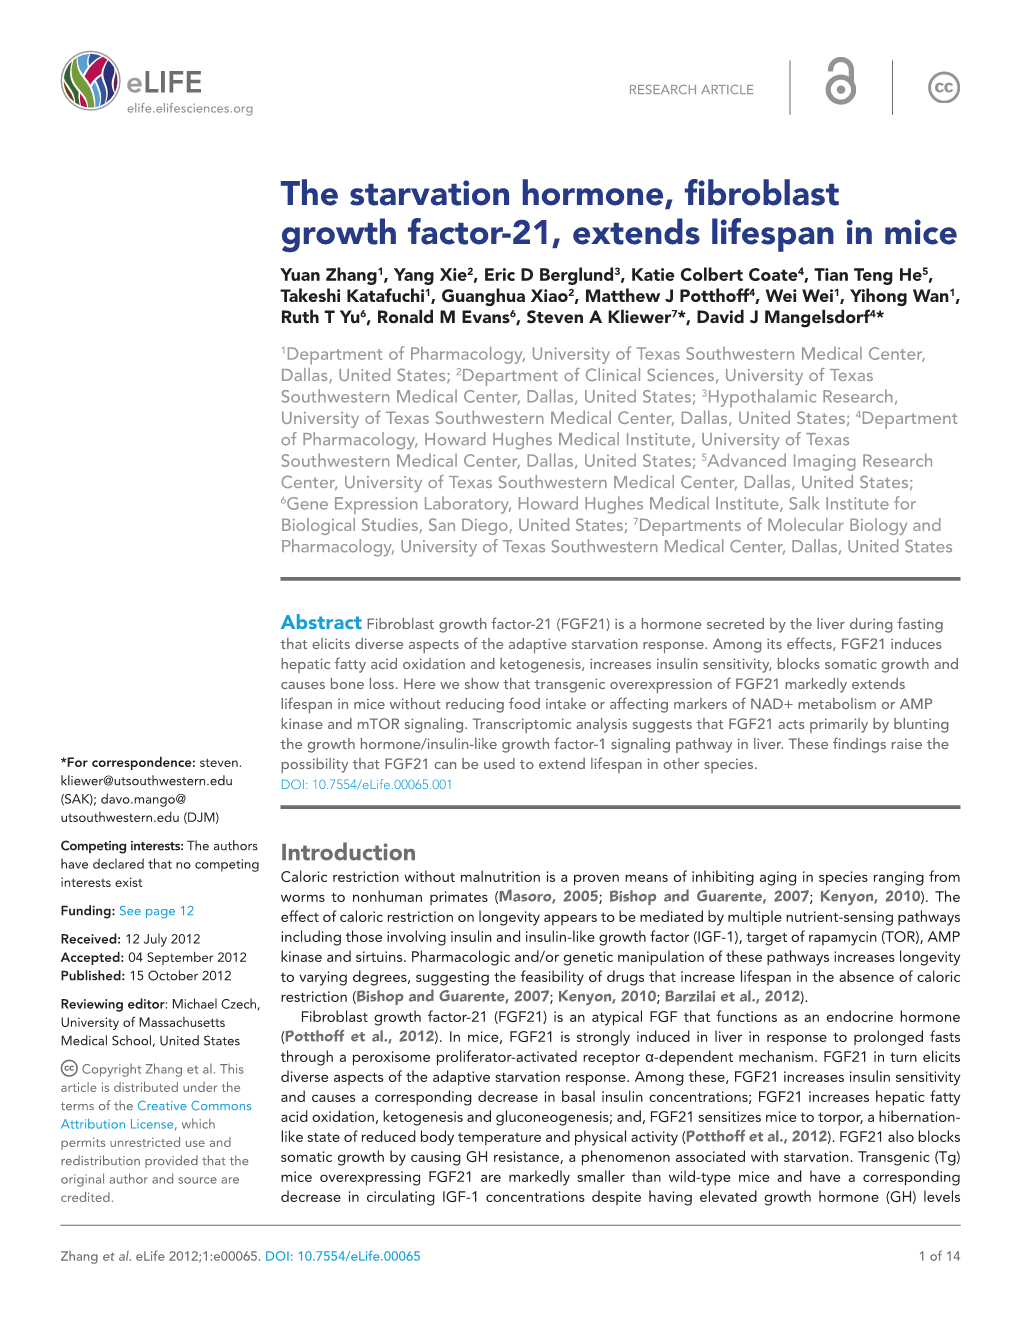 The Starvation Hormone, Fibroblast Growth Factor-21, Extends Lifespan